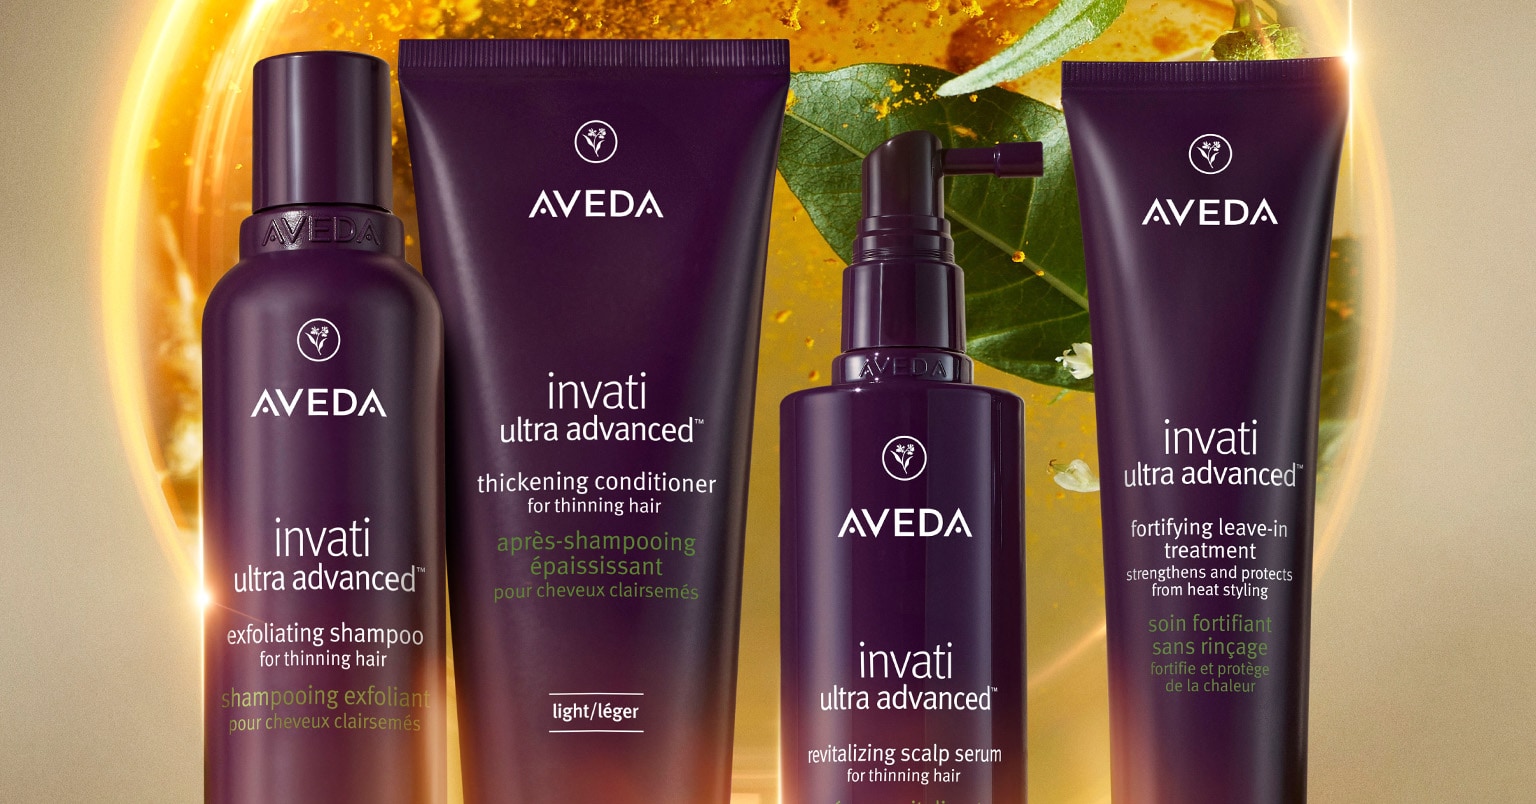 Shop invati ultra advanced hair care for thinning hair. Instantly thickens hair.